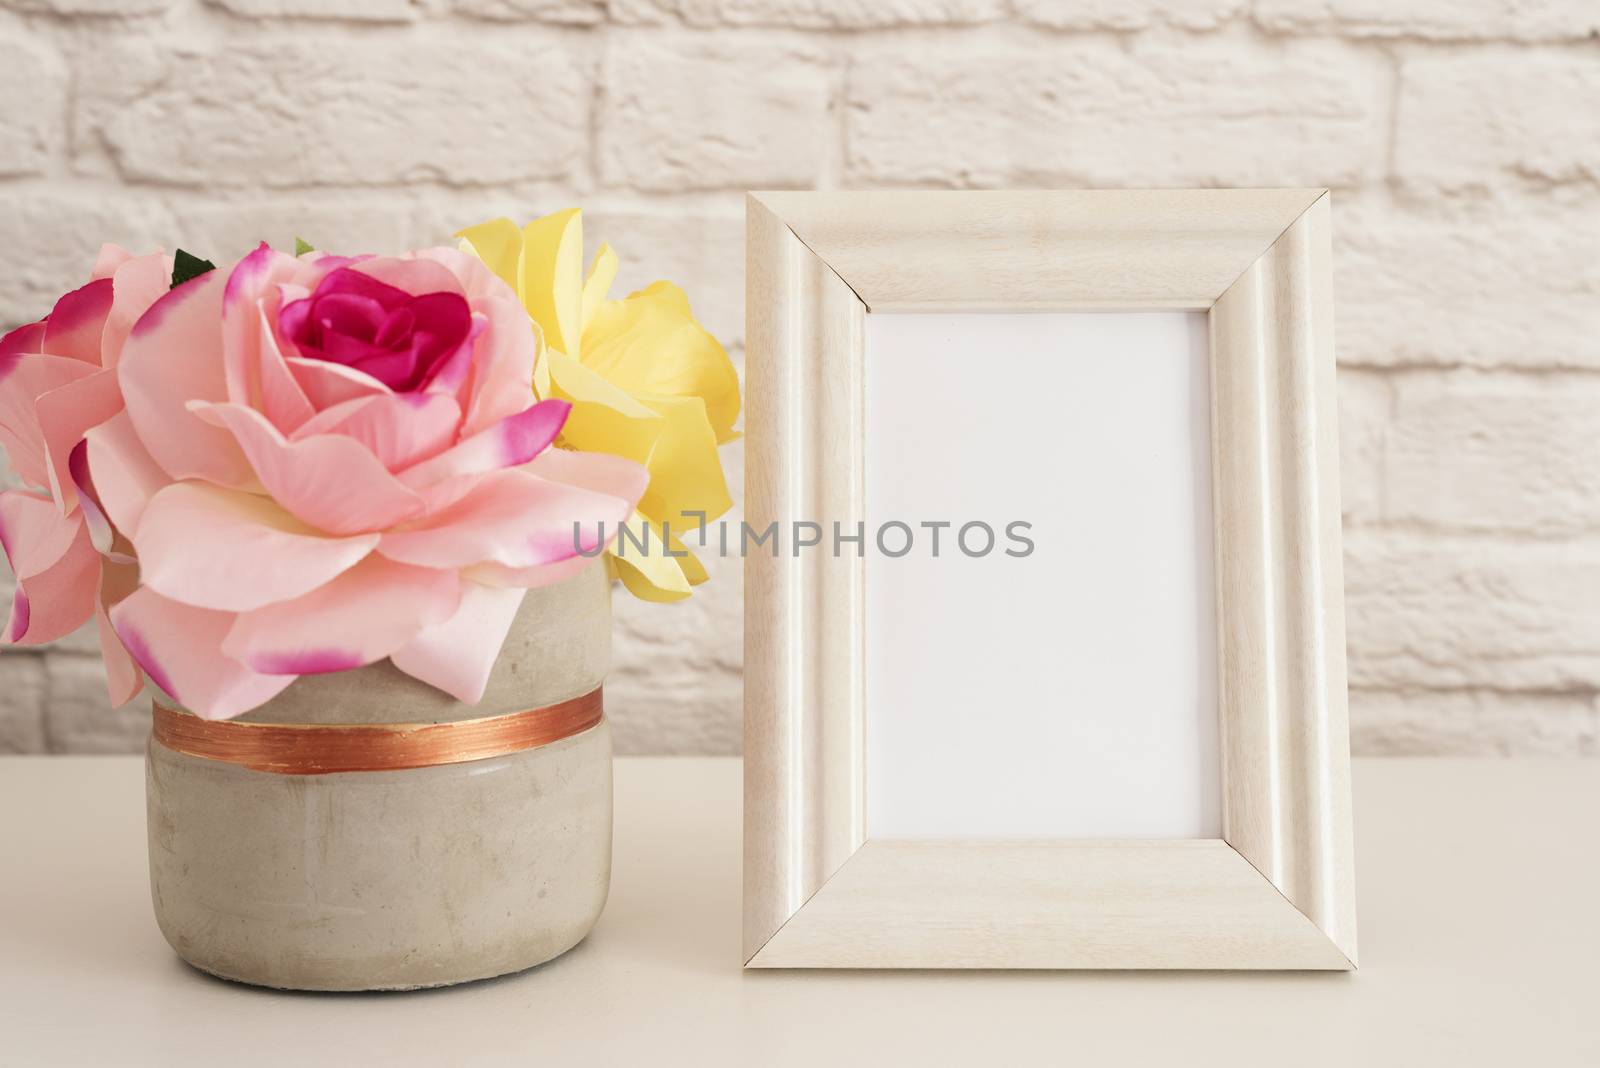 Frame Mockup. White Frame Mock up. Cream Picture Frame, Vase With Pink Roses. Product Frame Mockup. Wall Art Display Template, Brick Wall